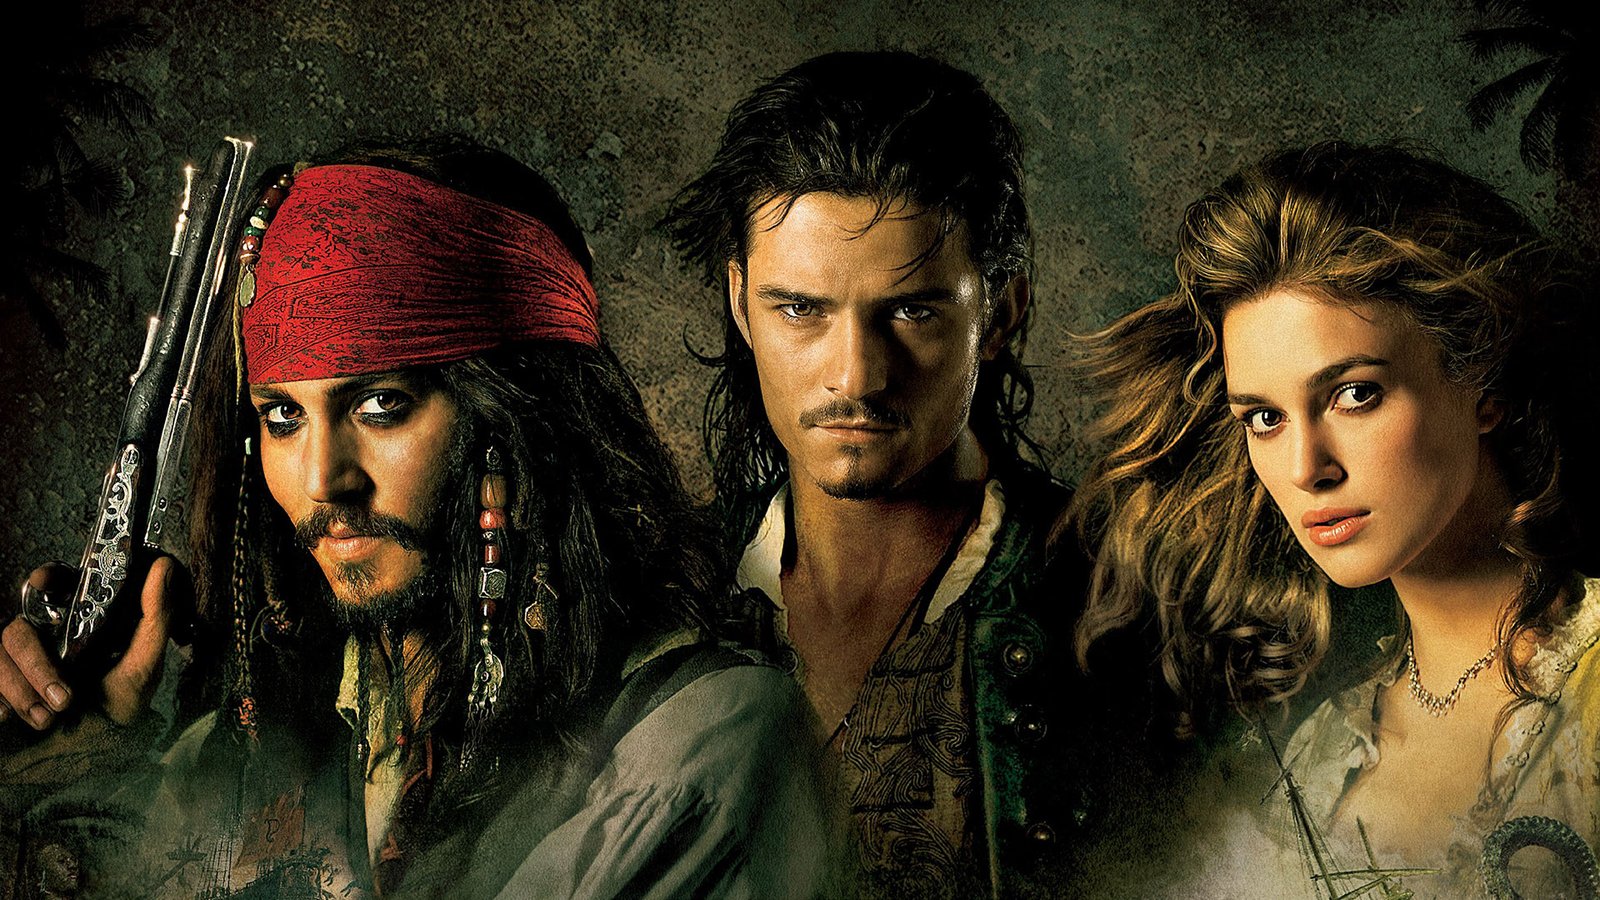  / Pirates of the Caribbean: Dead Man's Chest